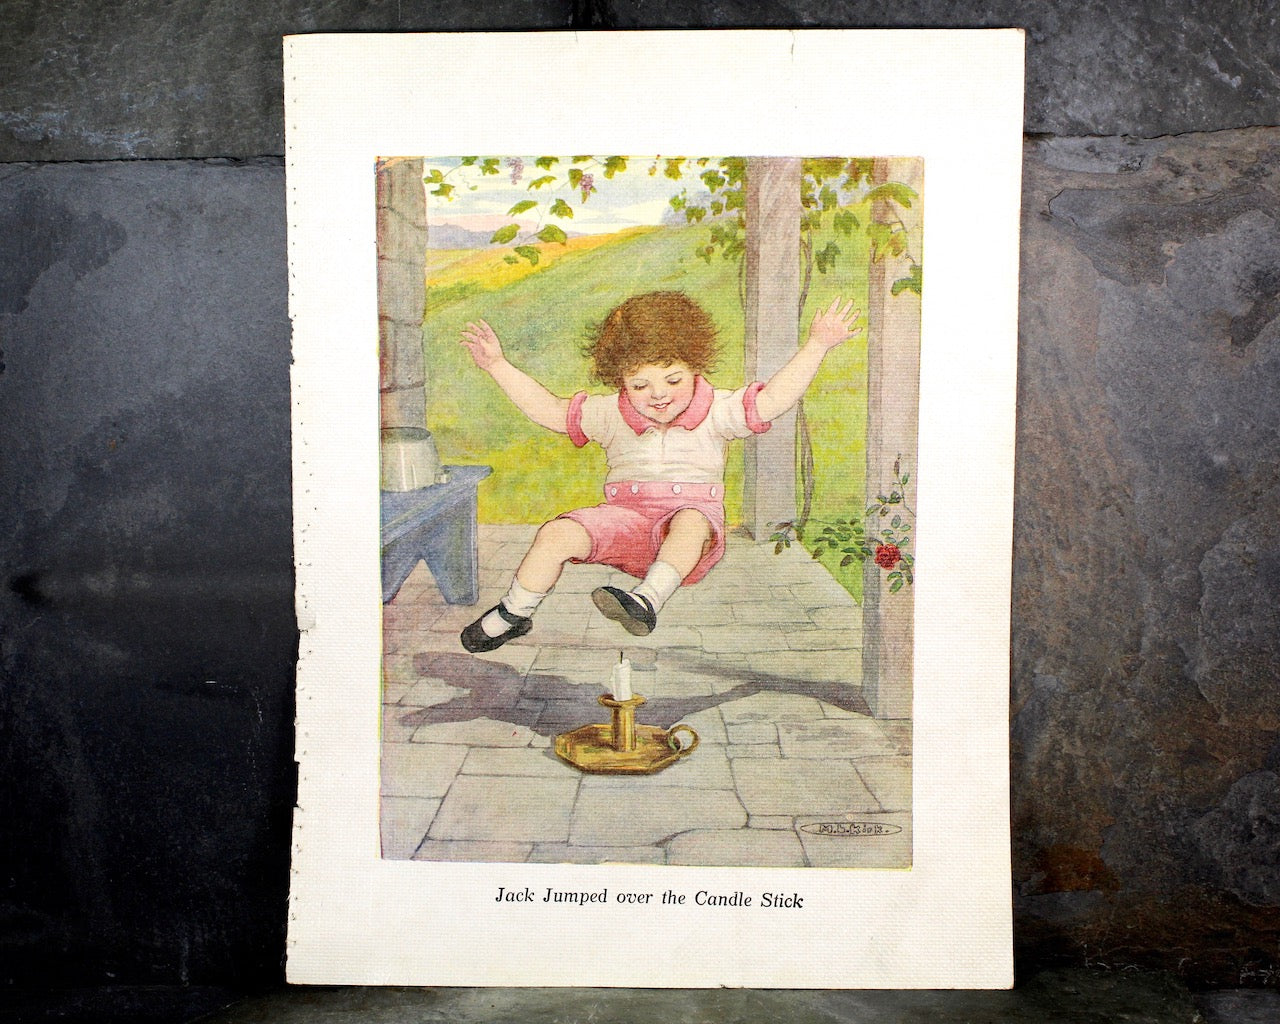 Antique Children's Picture Book Art - Your Choice of 4 Mother Goose Favorites (early 1900s) Pages - Nursery or Baby Gift- UNFRAMED